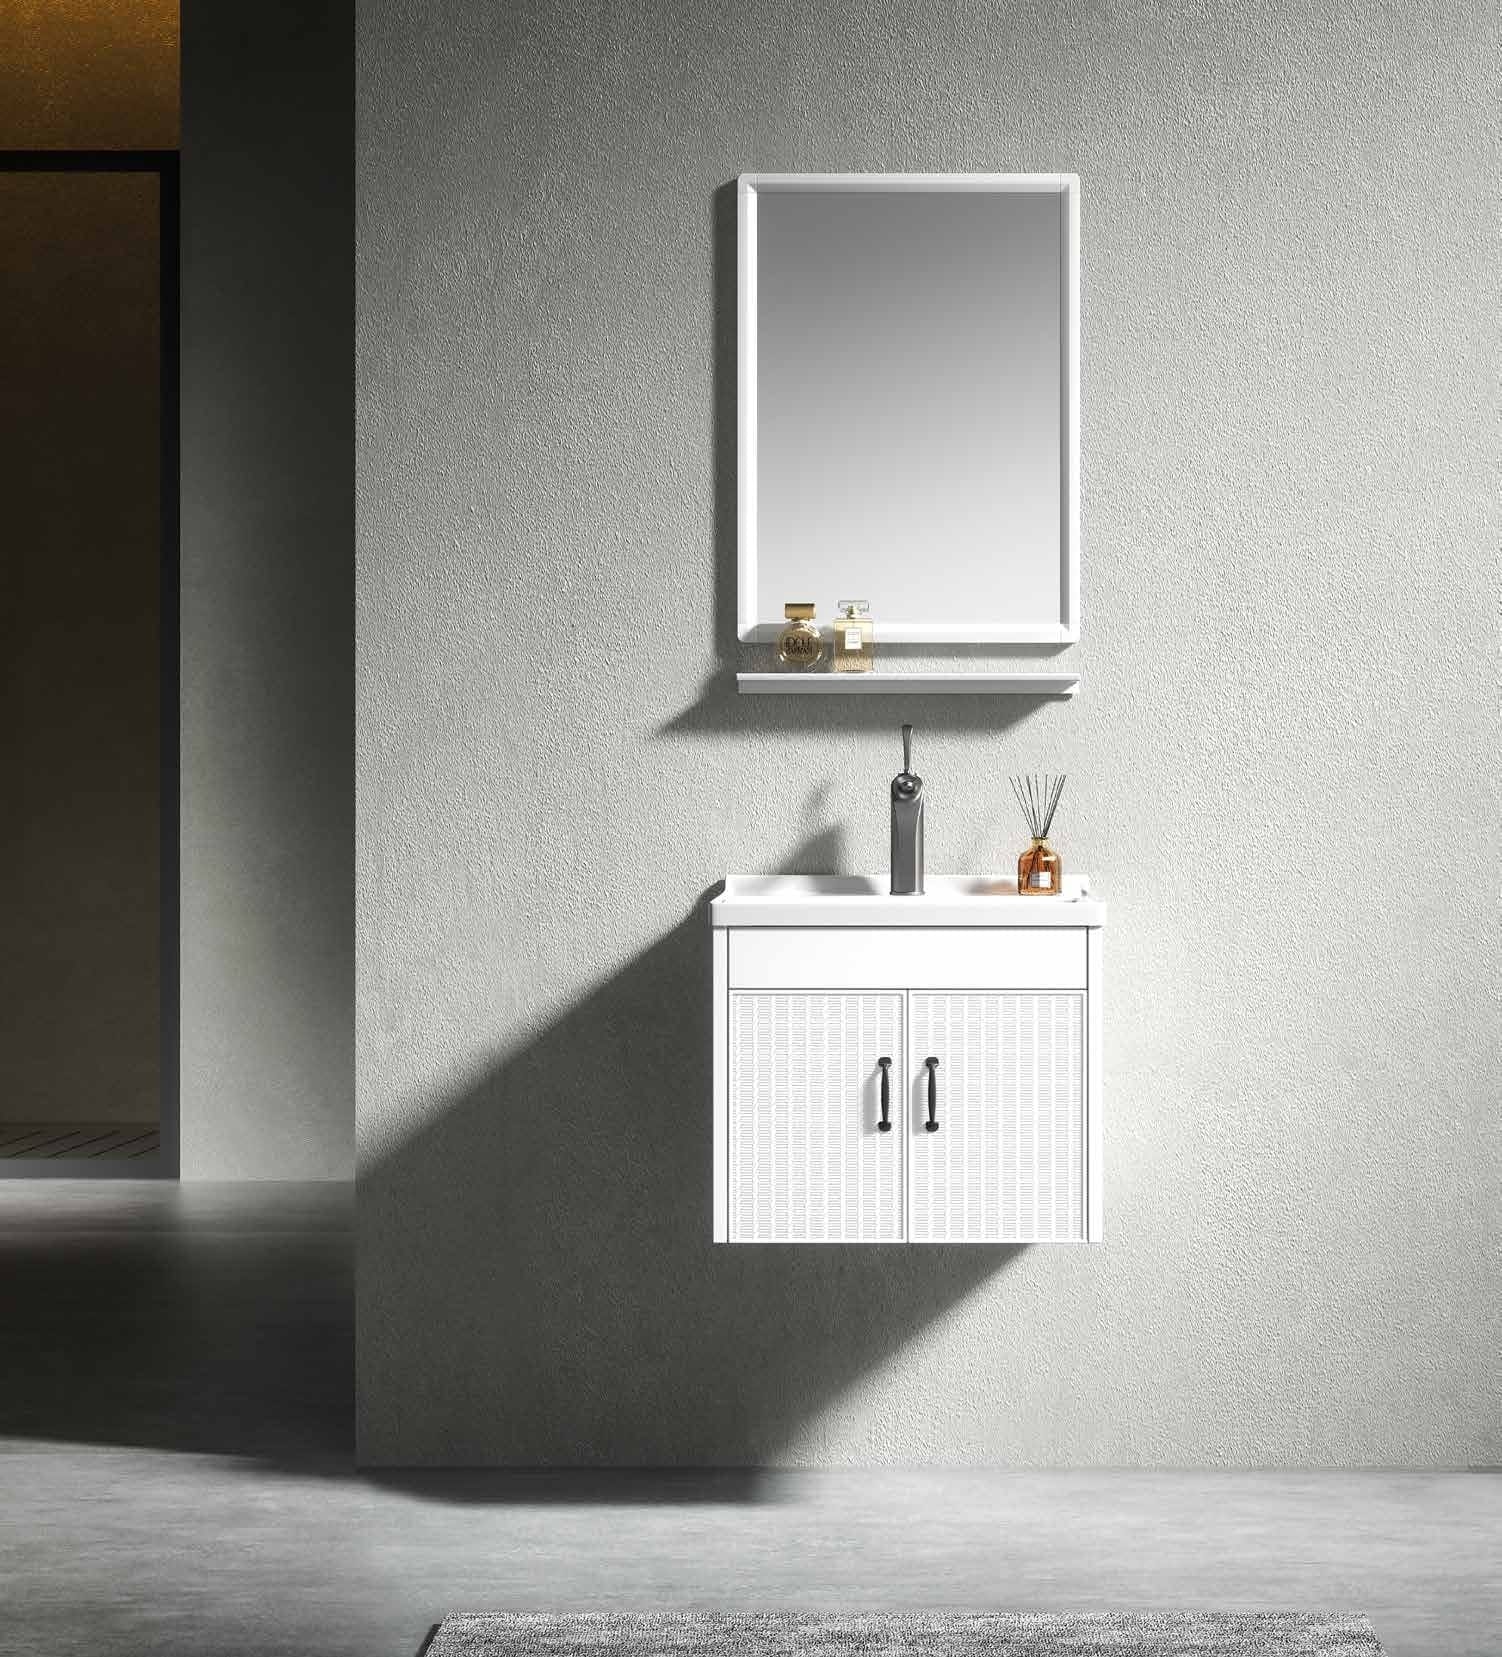 Buy Bathroom Luxury 60cm Wall-Mounted Vanity Cabinet with Mirror - WK-K-9922 | Shop at Supply Master Accra, Ghana Bathroom Vanity & Cabinets Buy Tools hardware Building materials